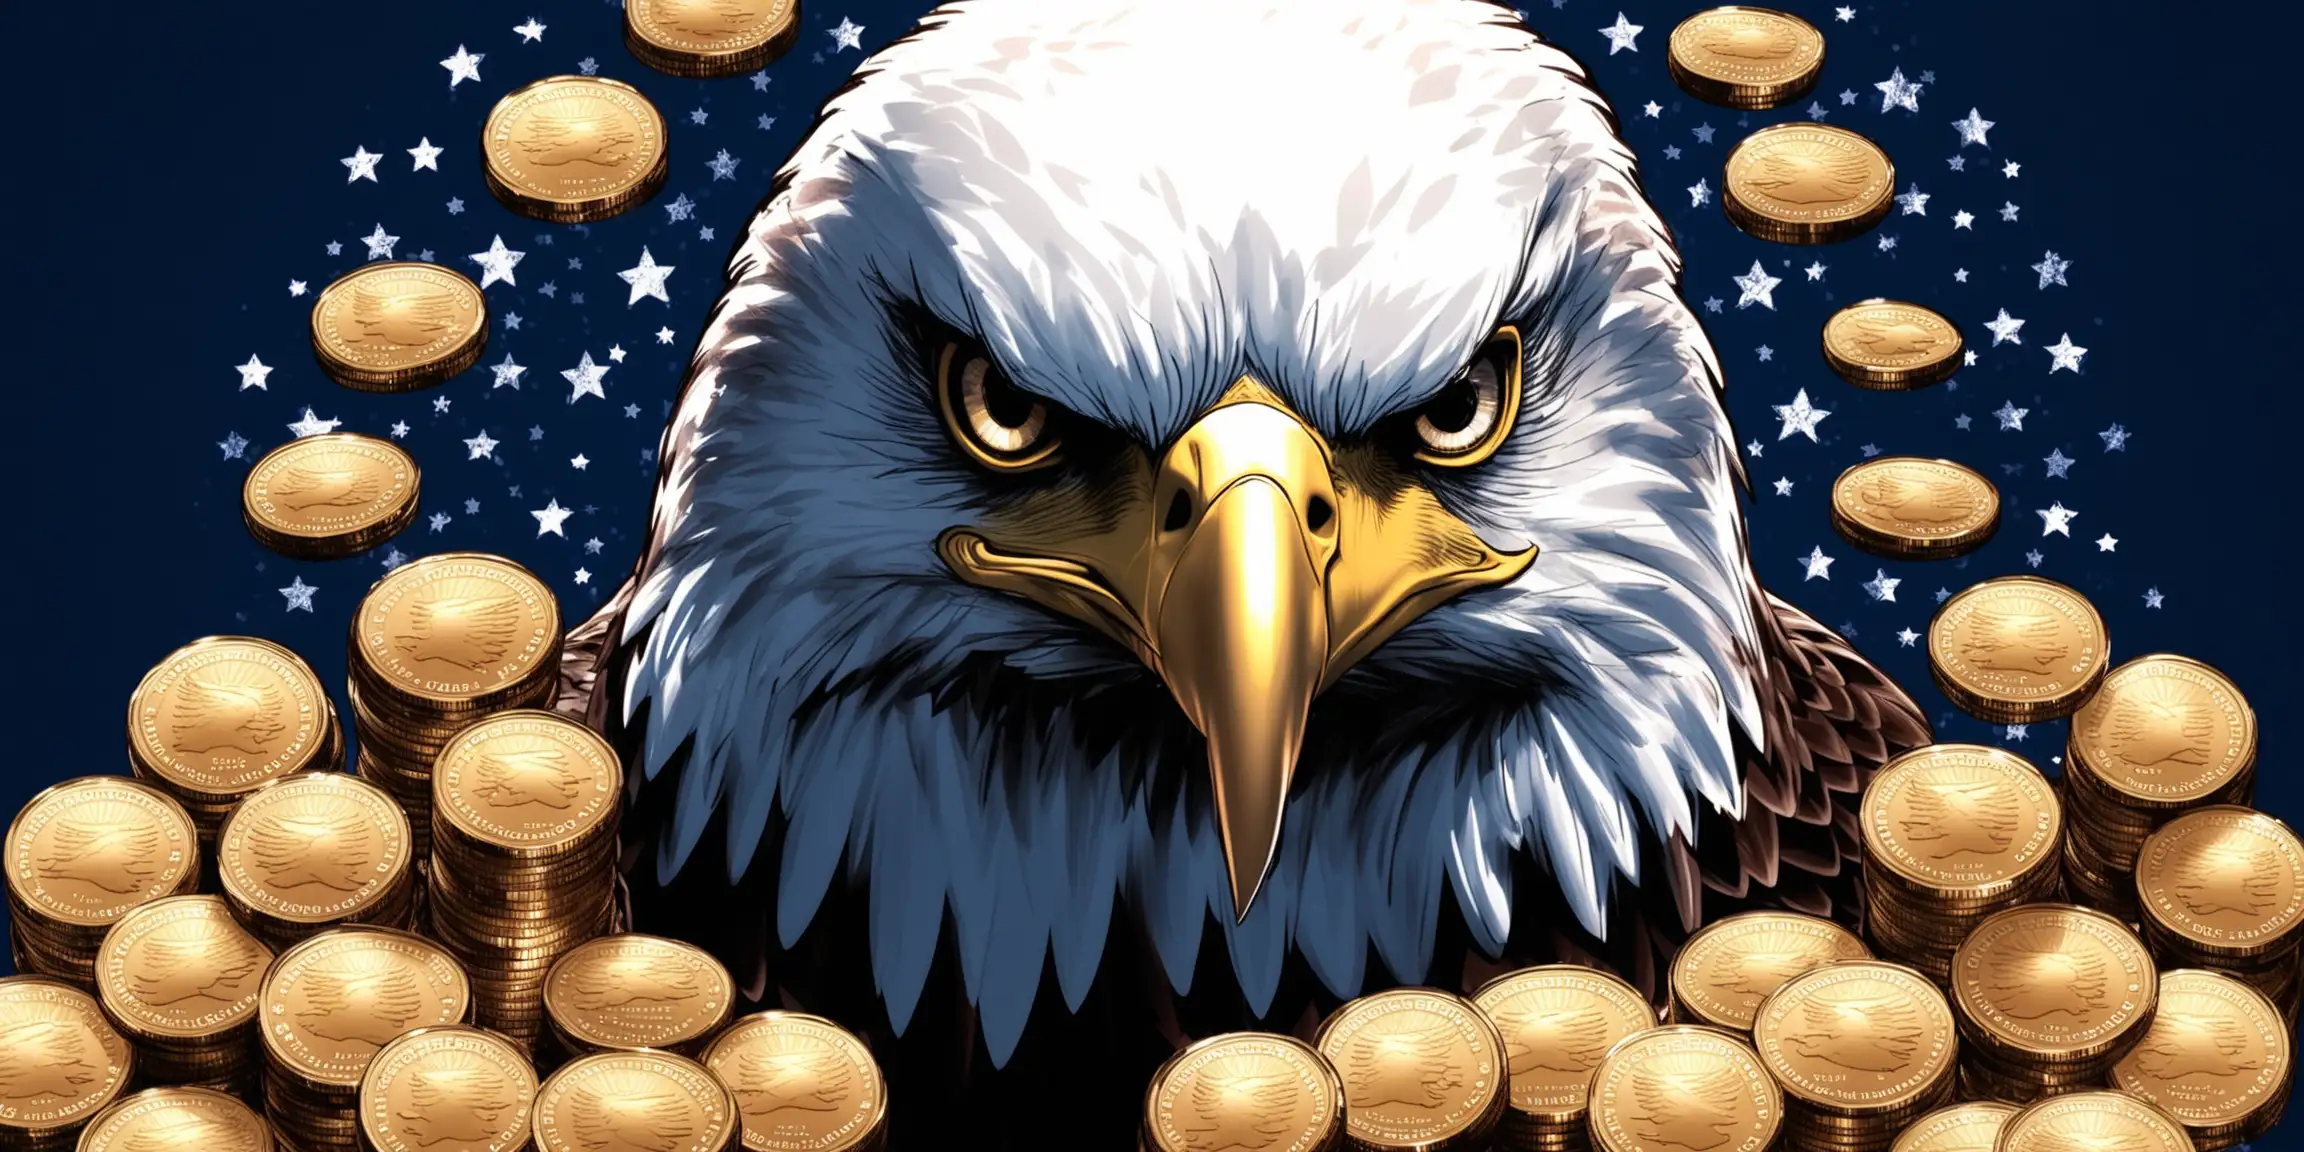 Bald Eagle Head with United States Trust Coin Crypto Coins on Midnight Blue Background